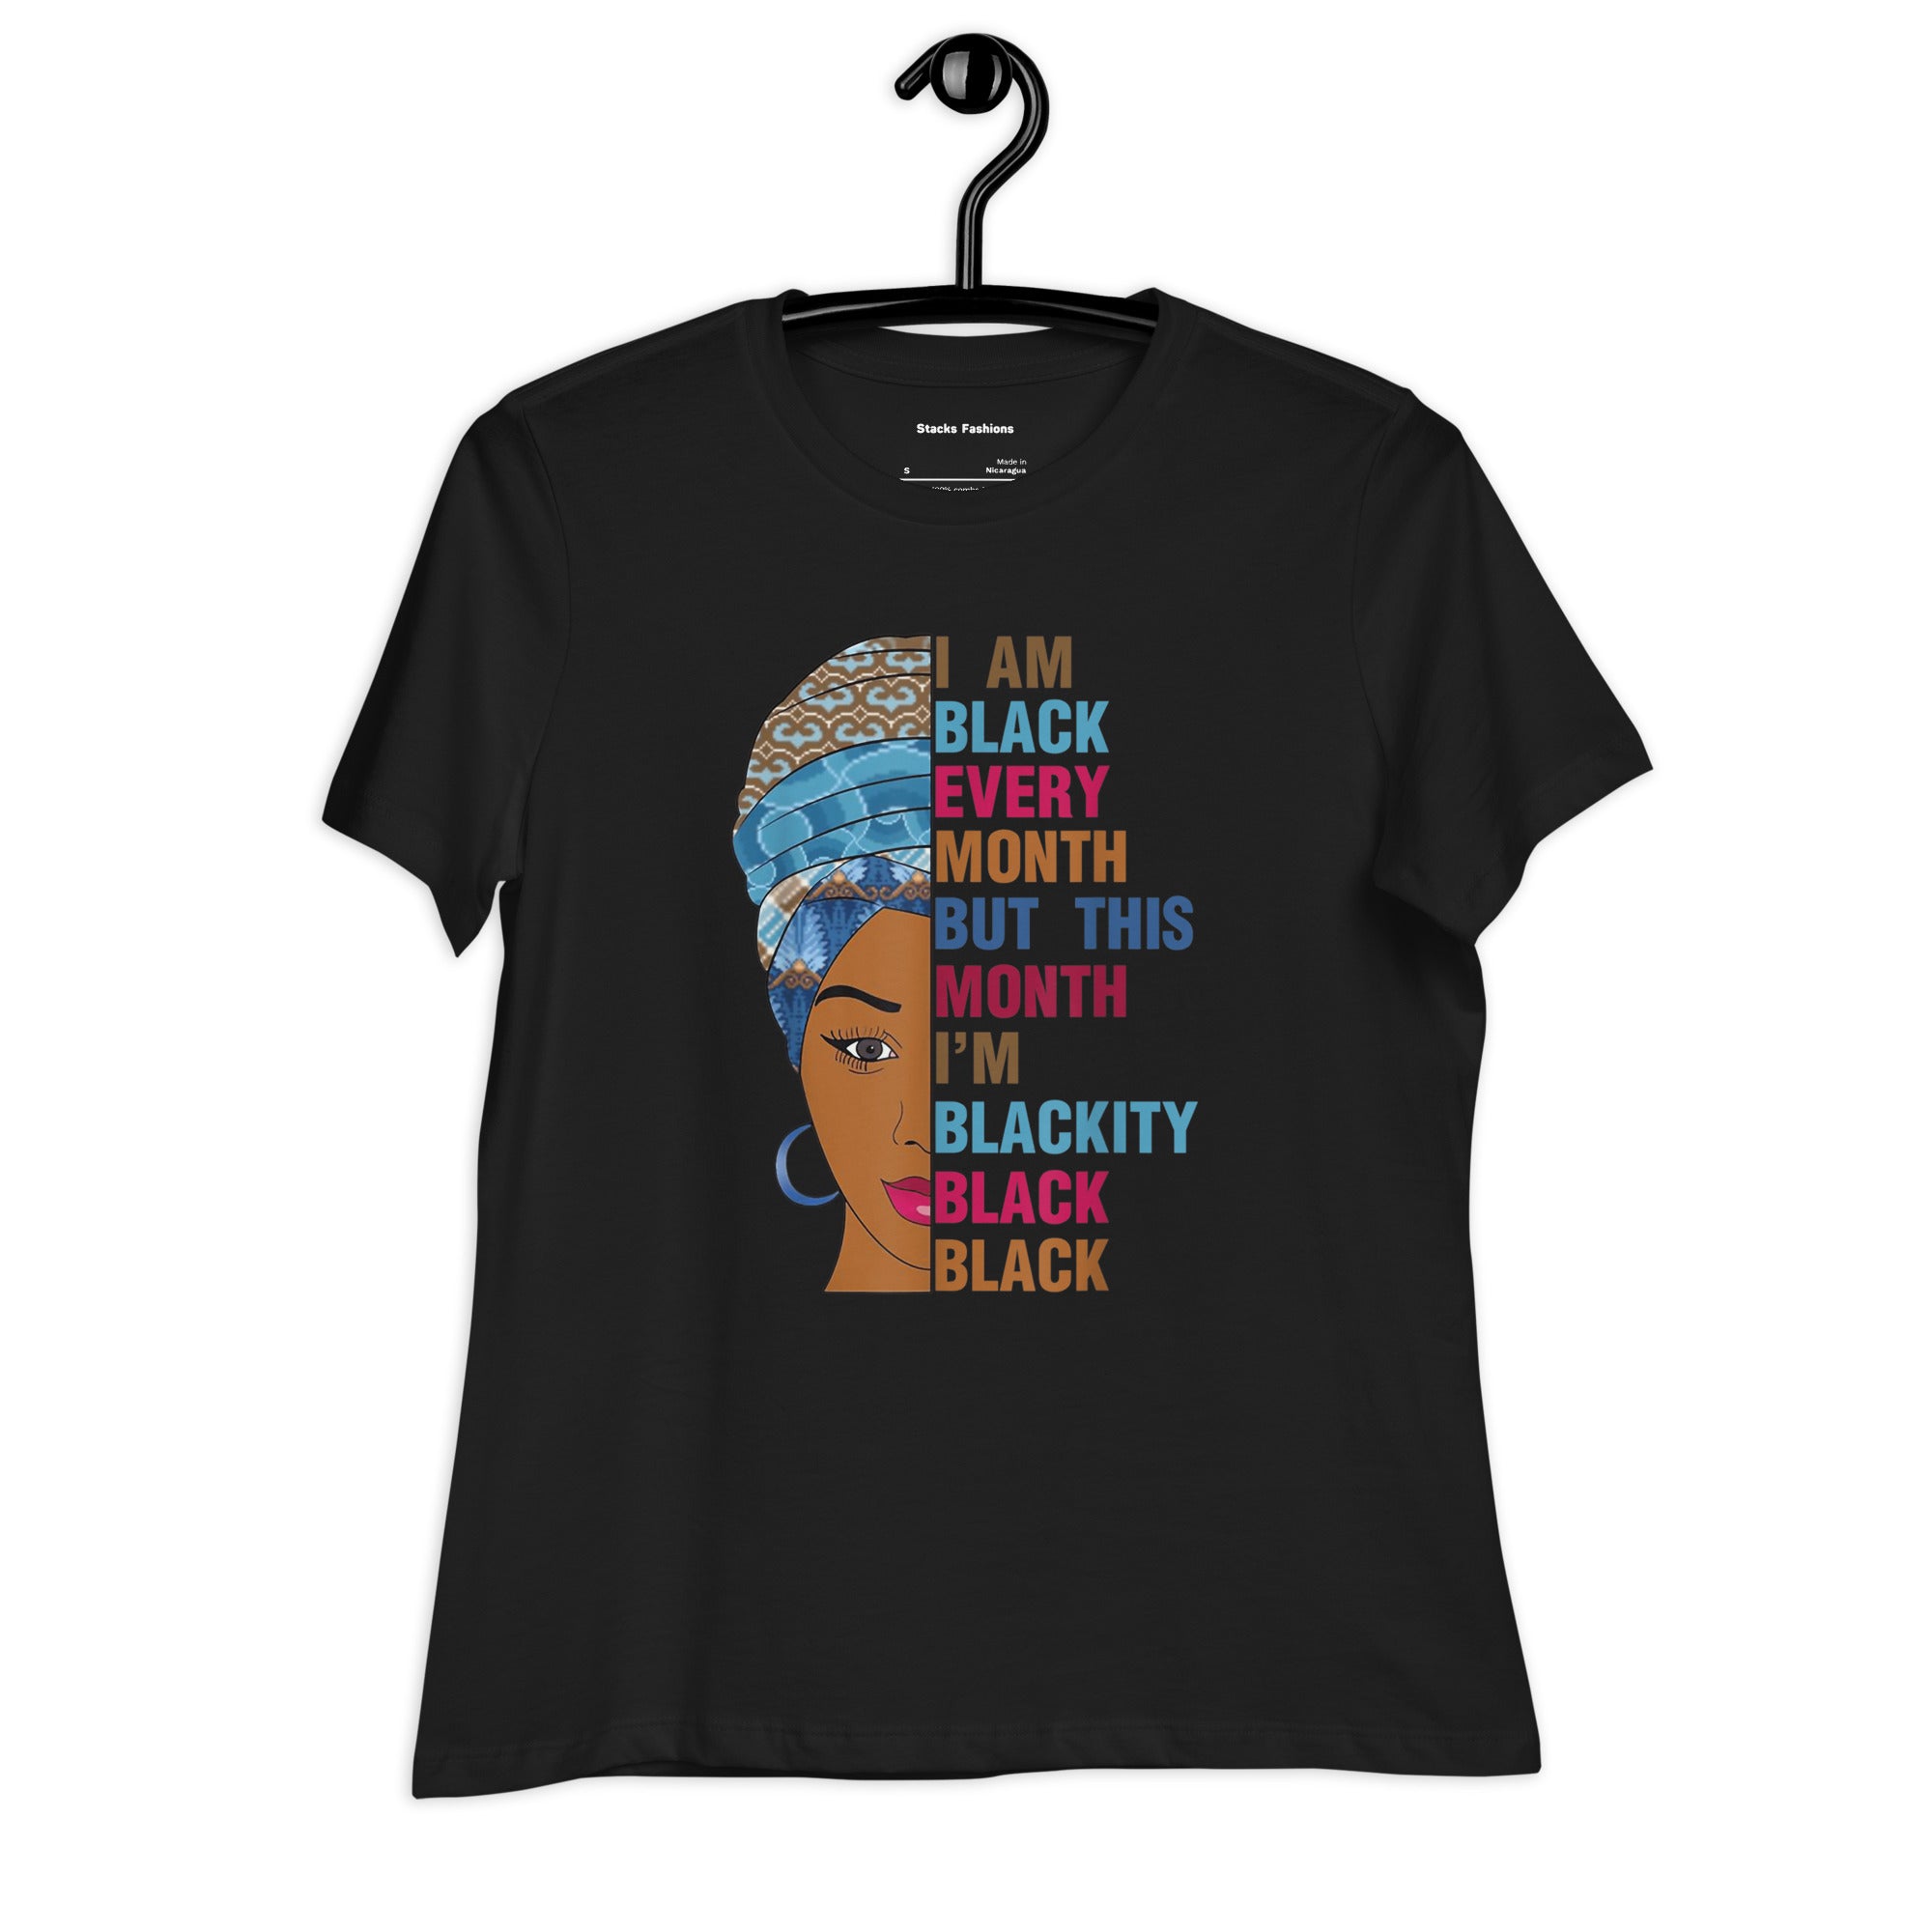 Black History Women's Relaxed T-Shirt